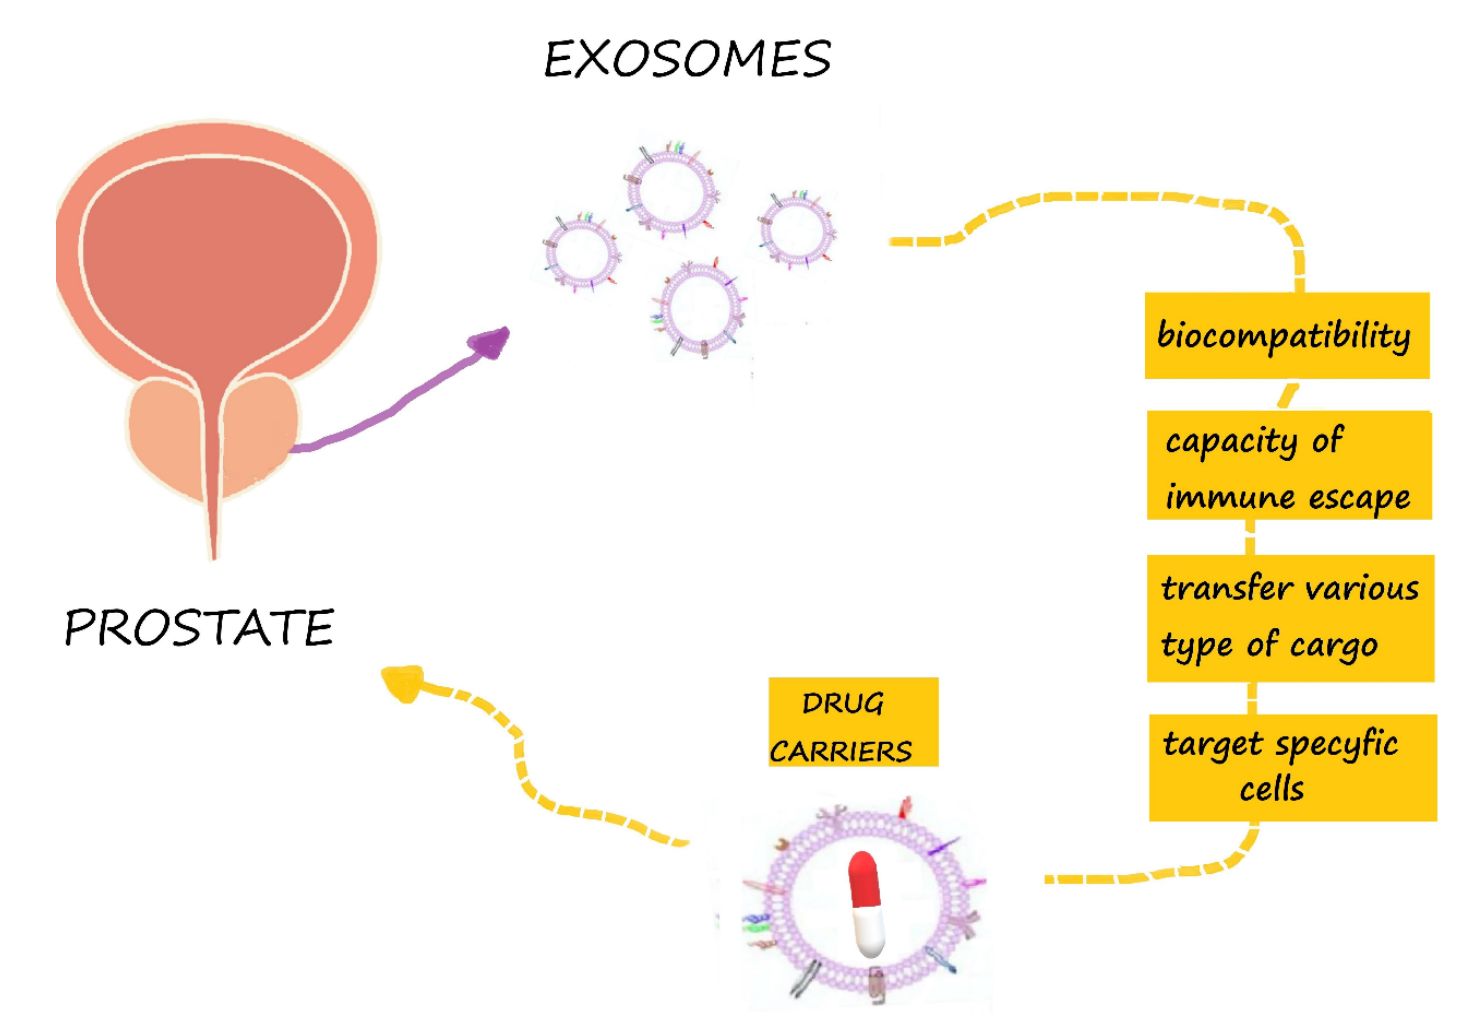 Figure 3. Exosomes as drug carriers in prostate cancer therapy.